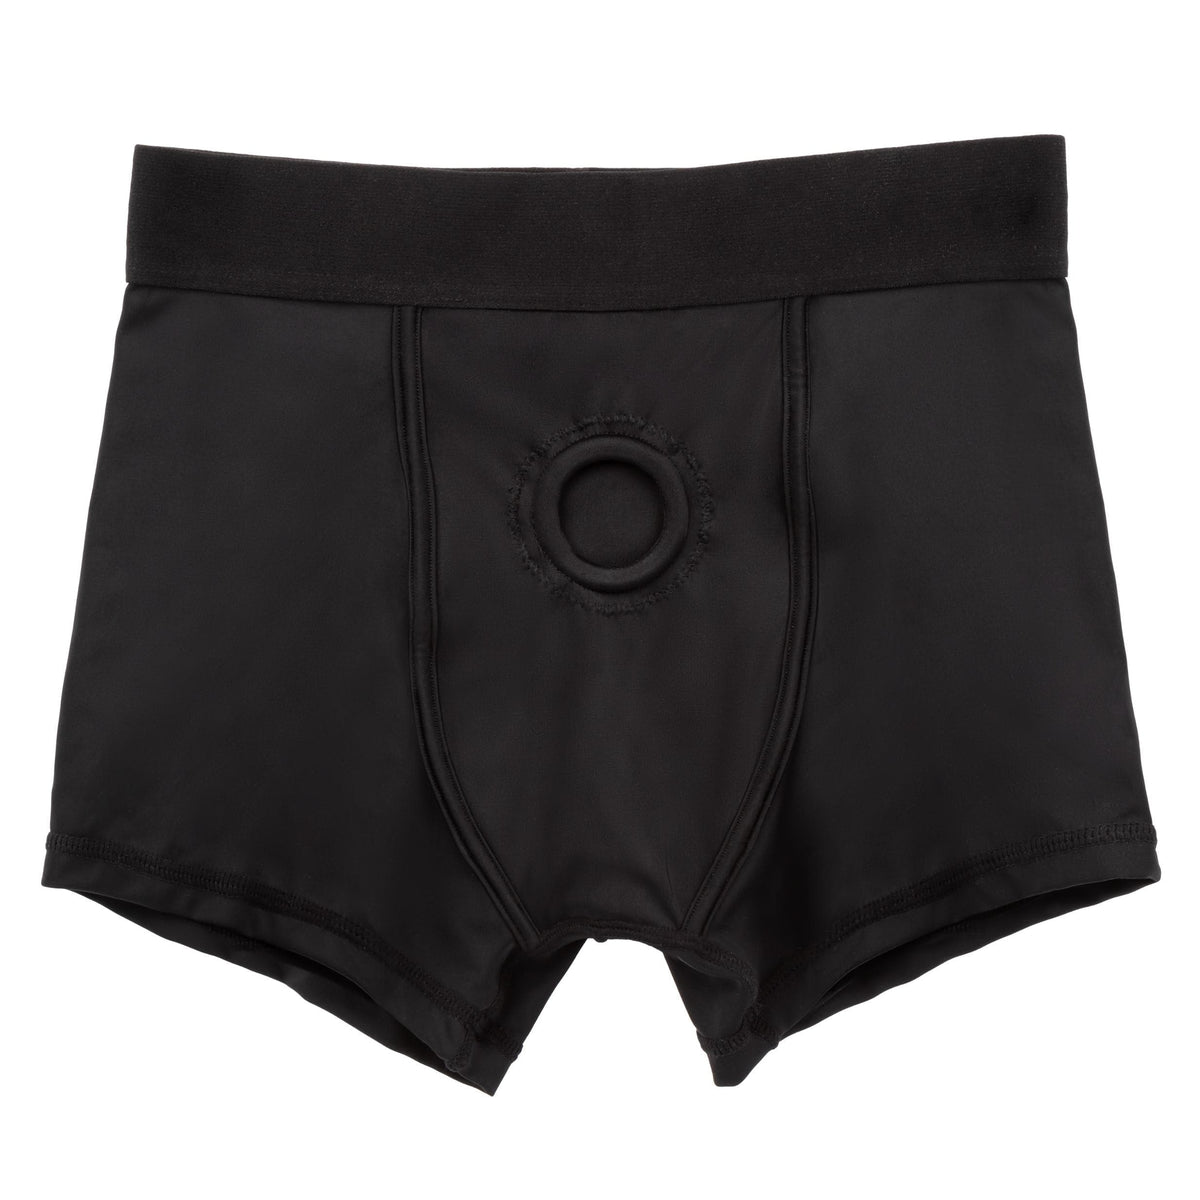 her royal harness boxer brief s m